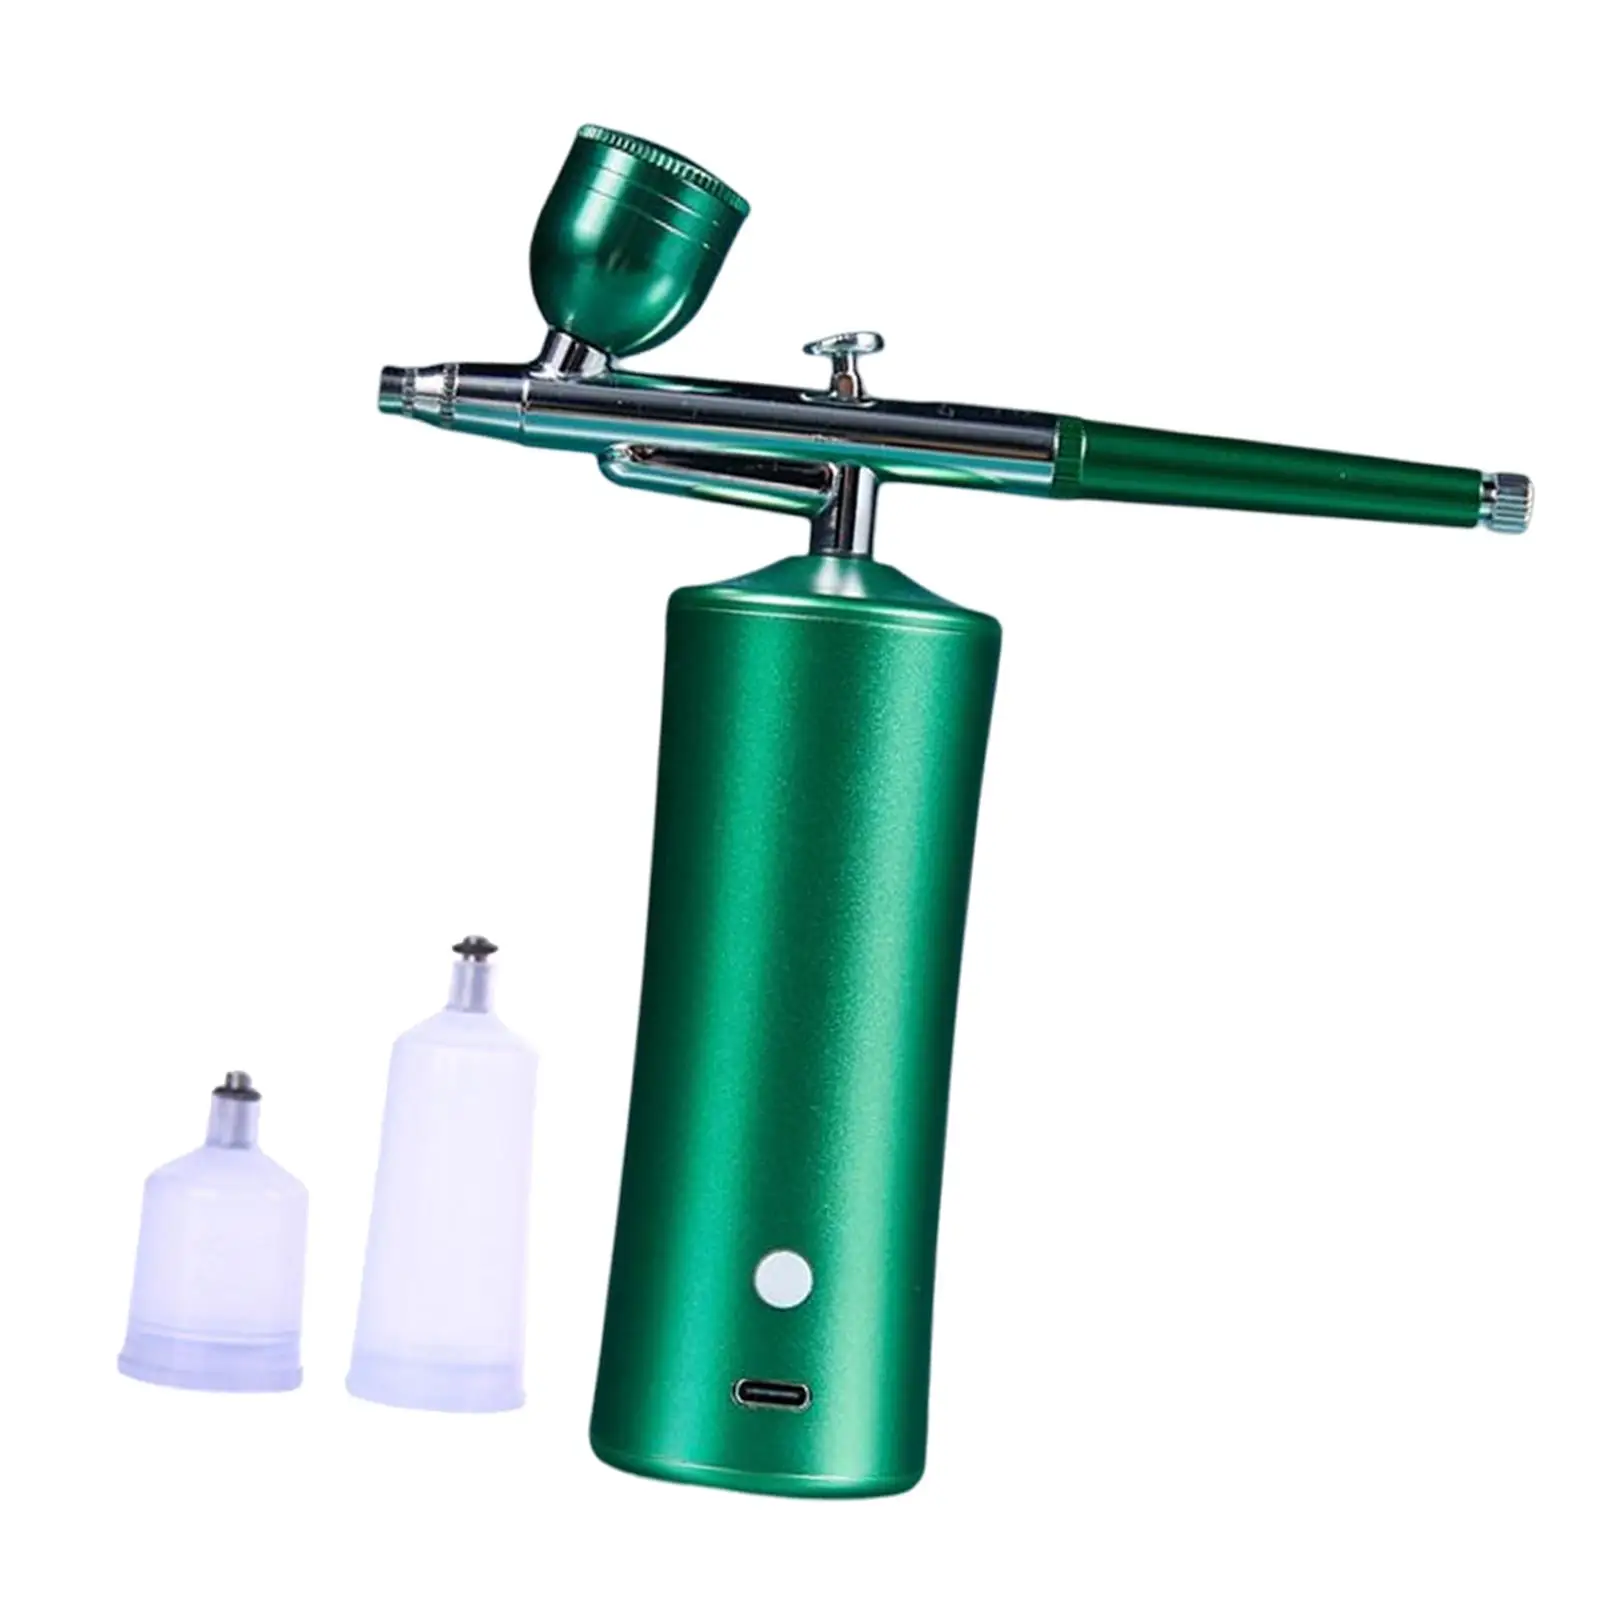 Airbrush Portable Professional Accessories Easy to Use Parts for Makeup